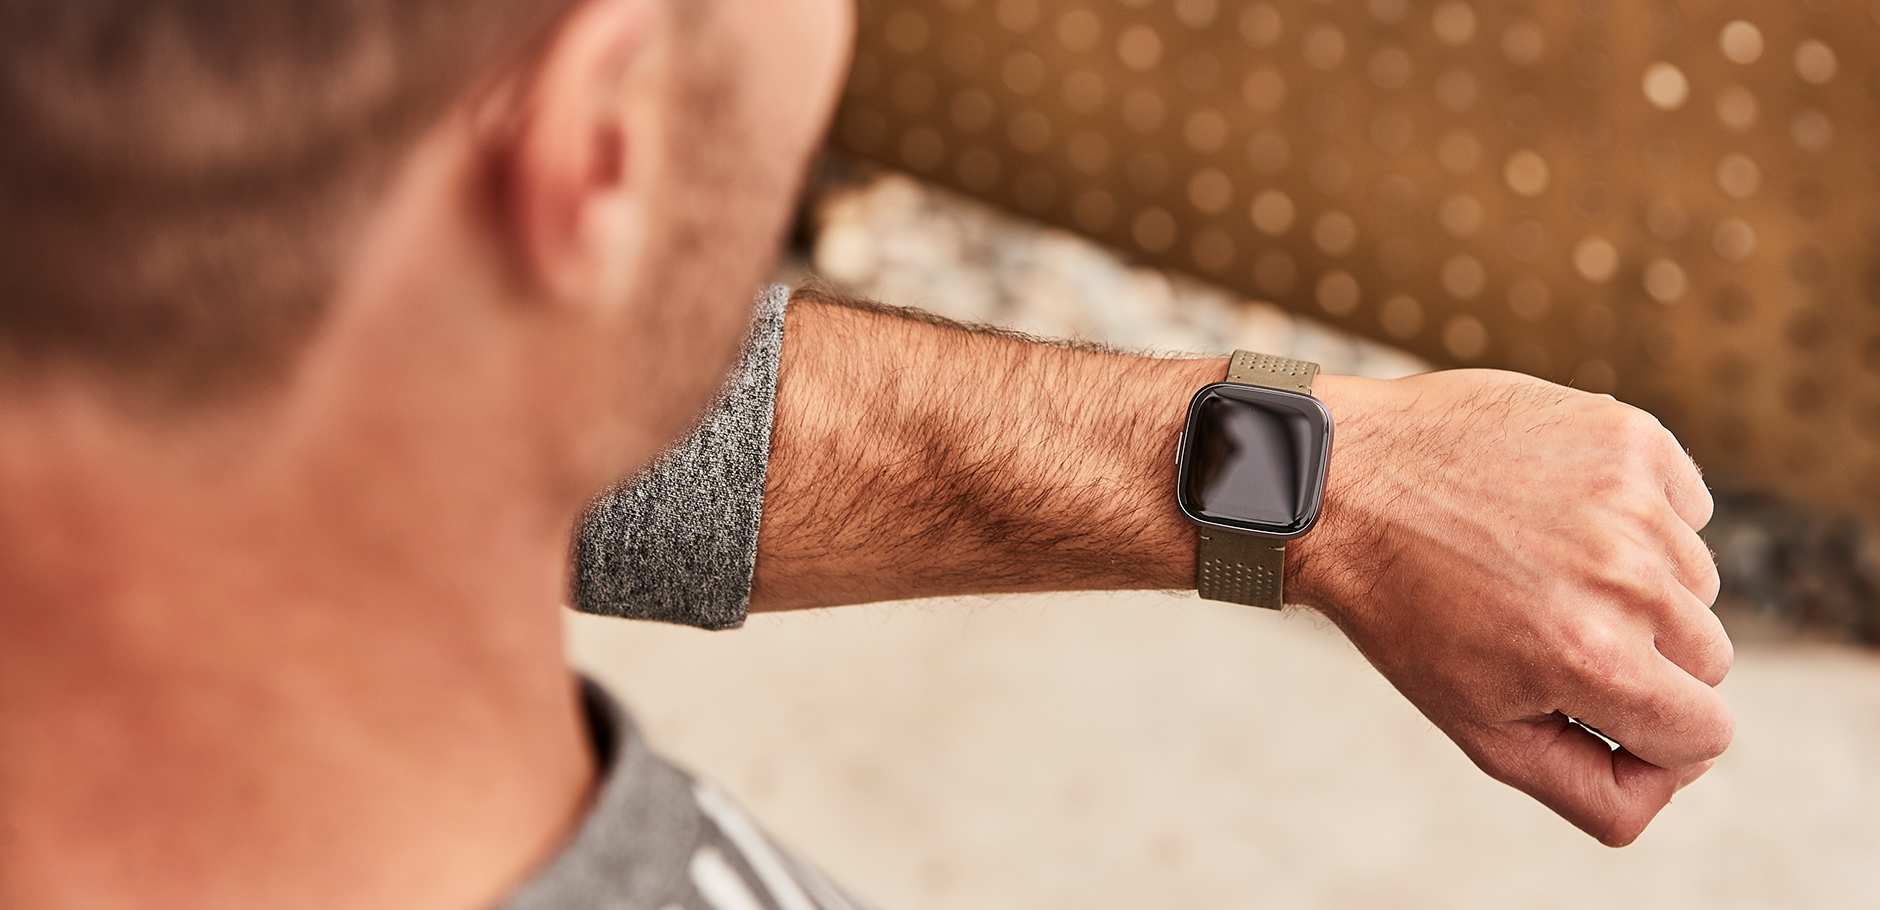 leather straps for fitbit versa